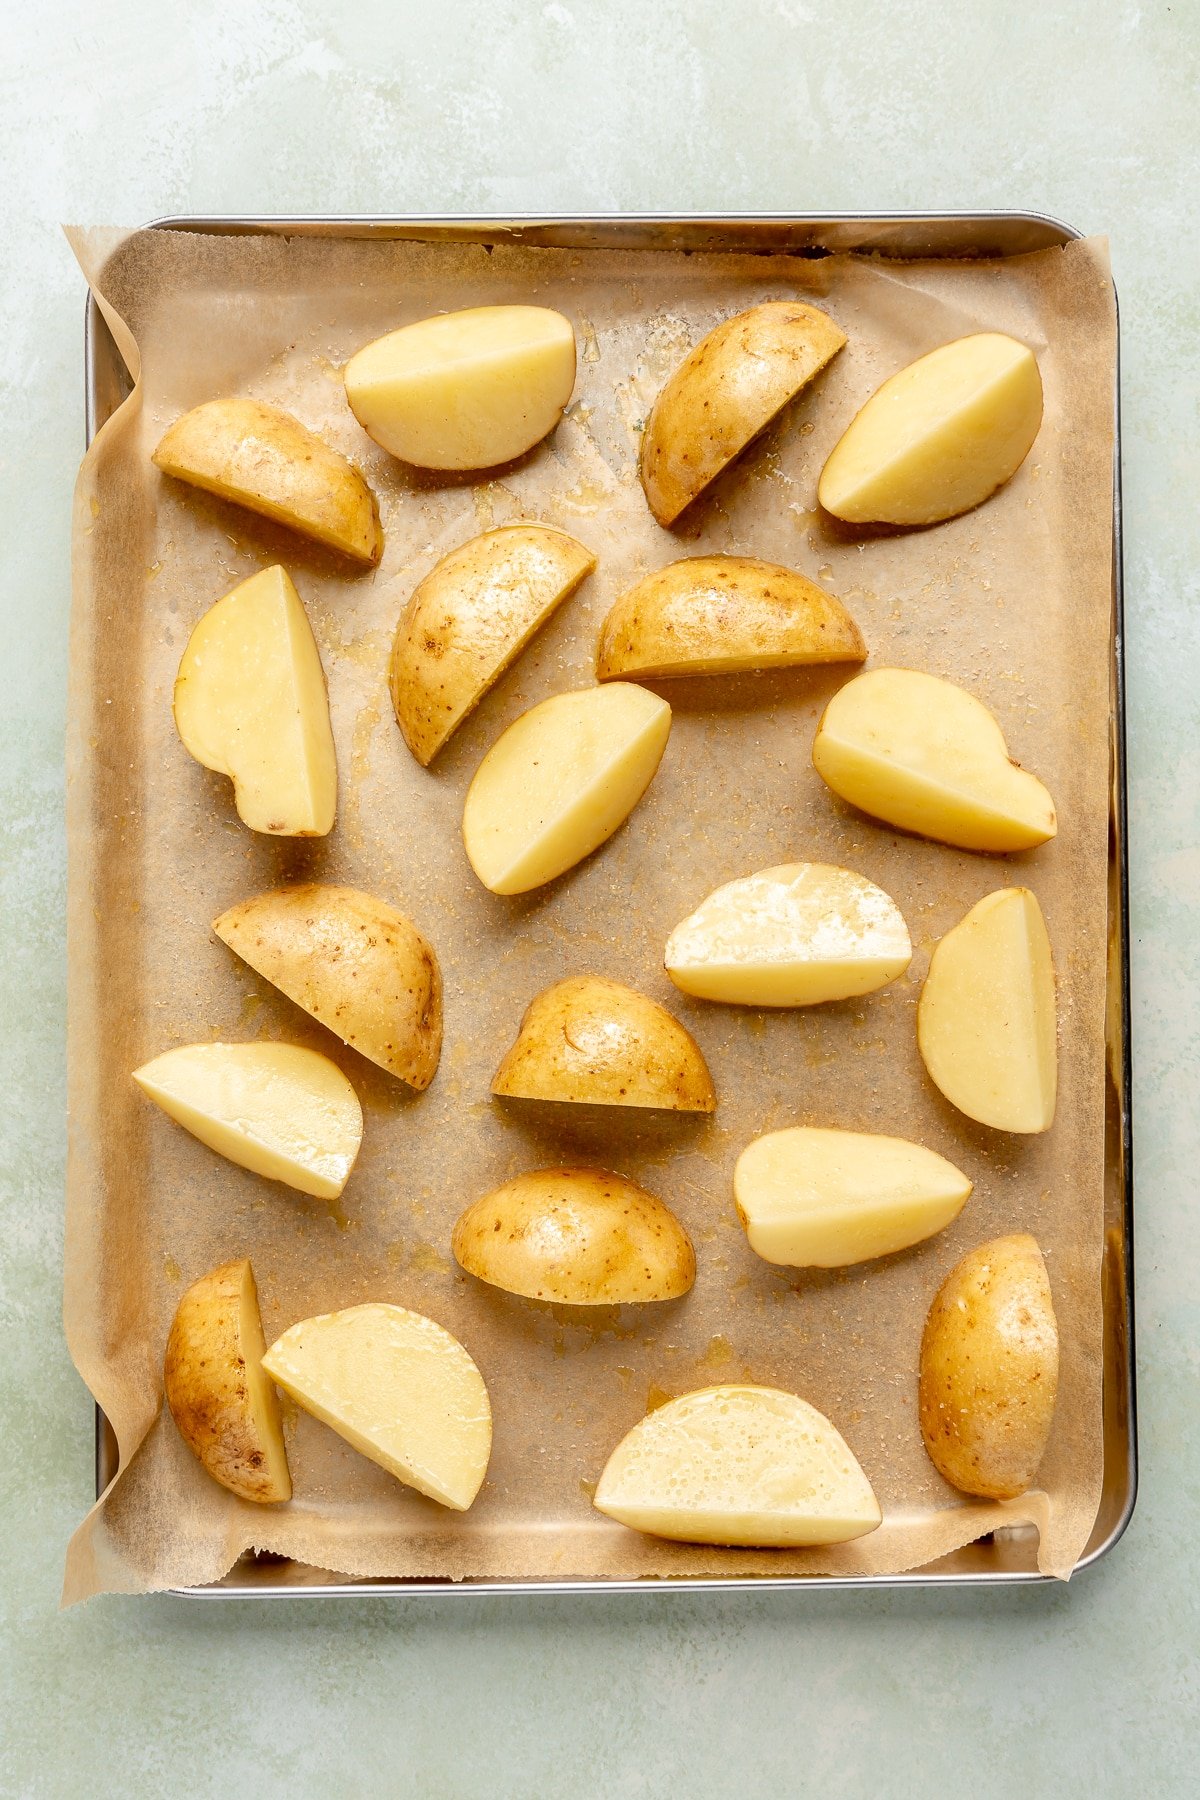 Quartered yellow potatoes have been sprinkled in seasonings and been placed on a parchment lined baking sheet.